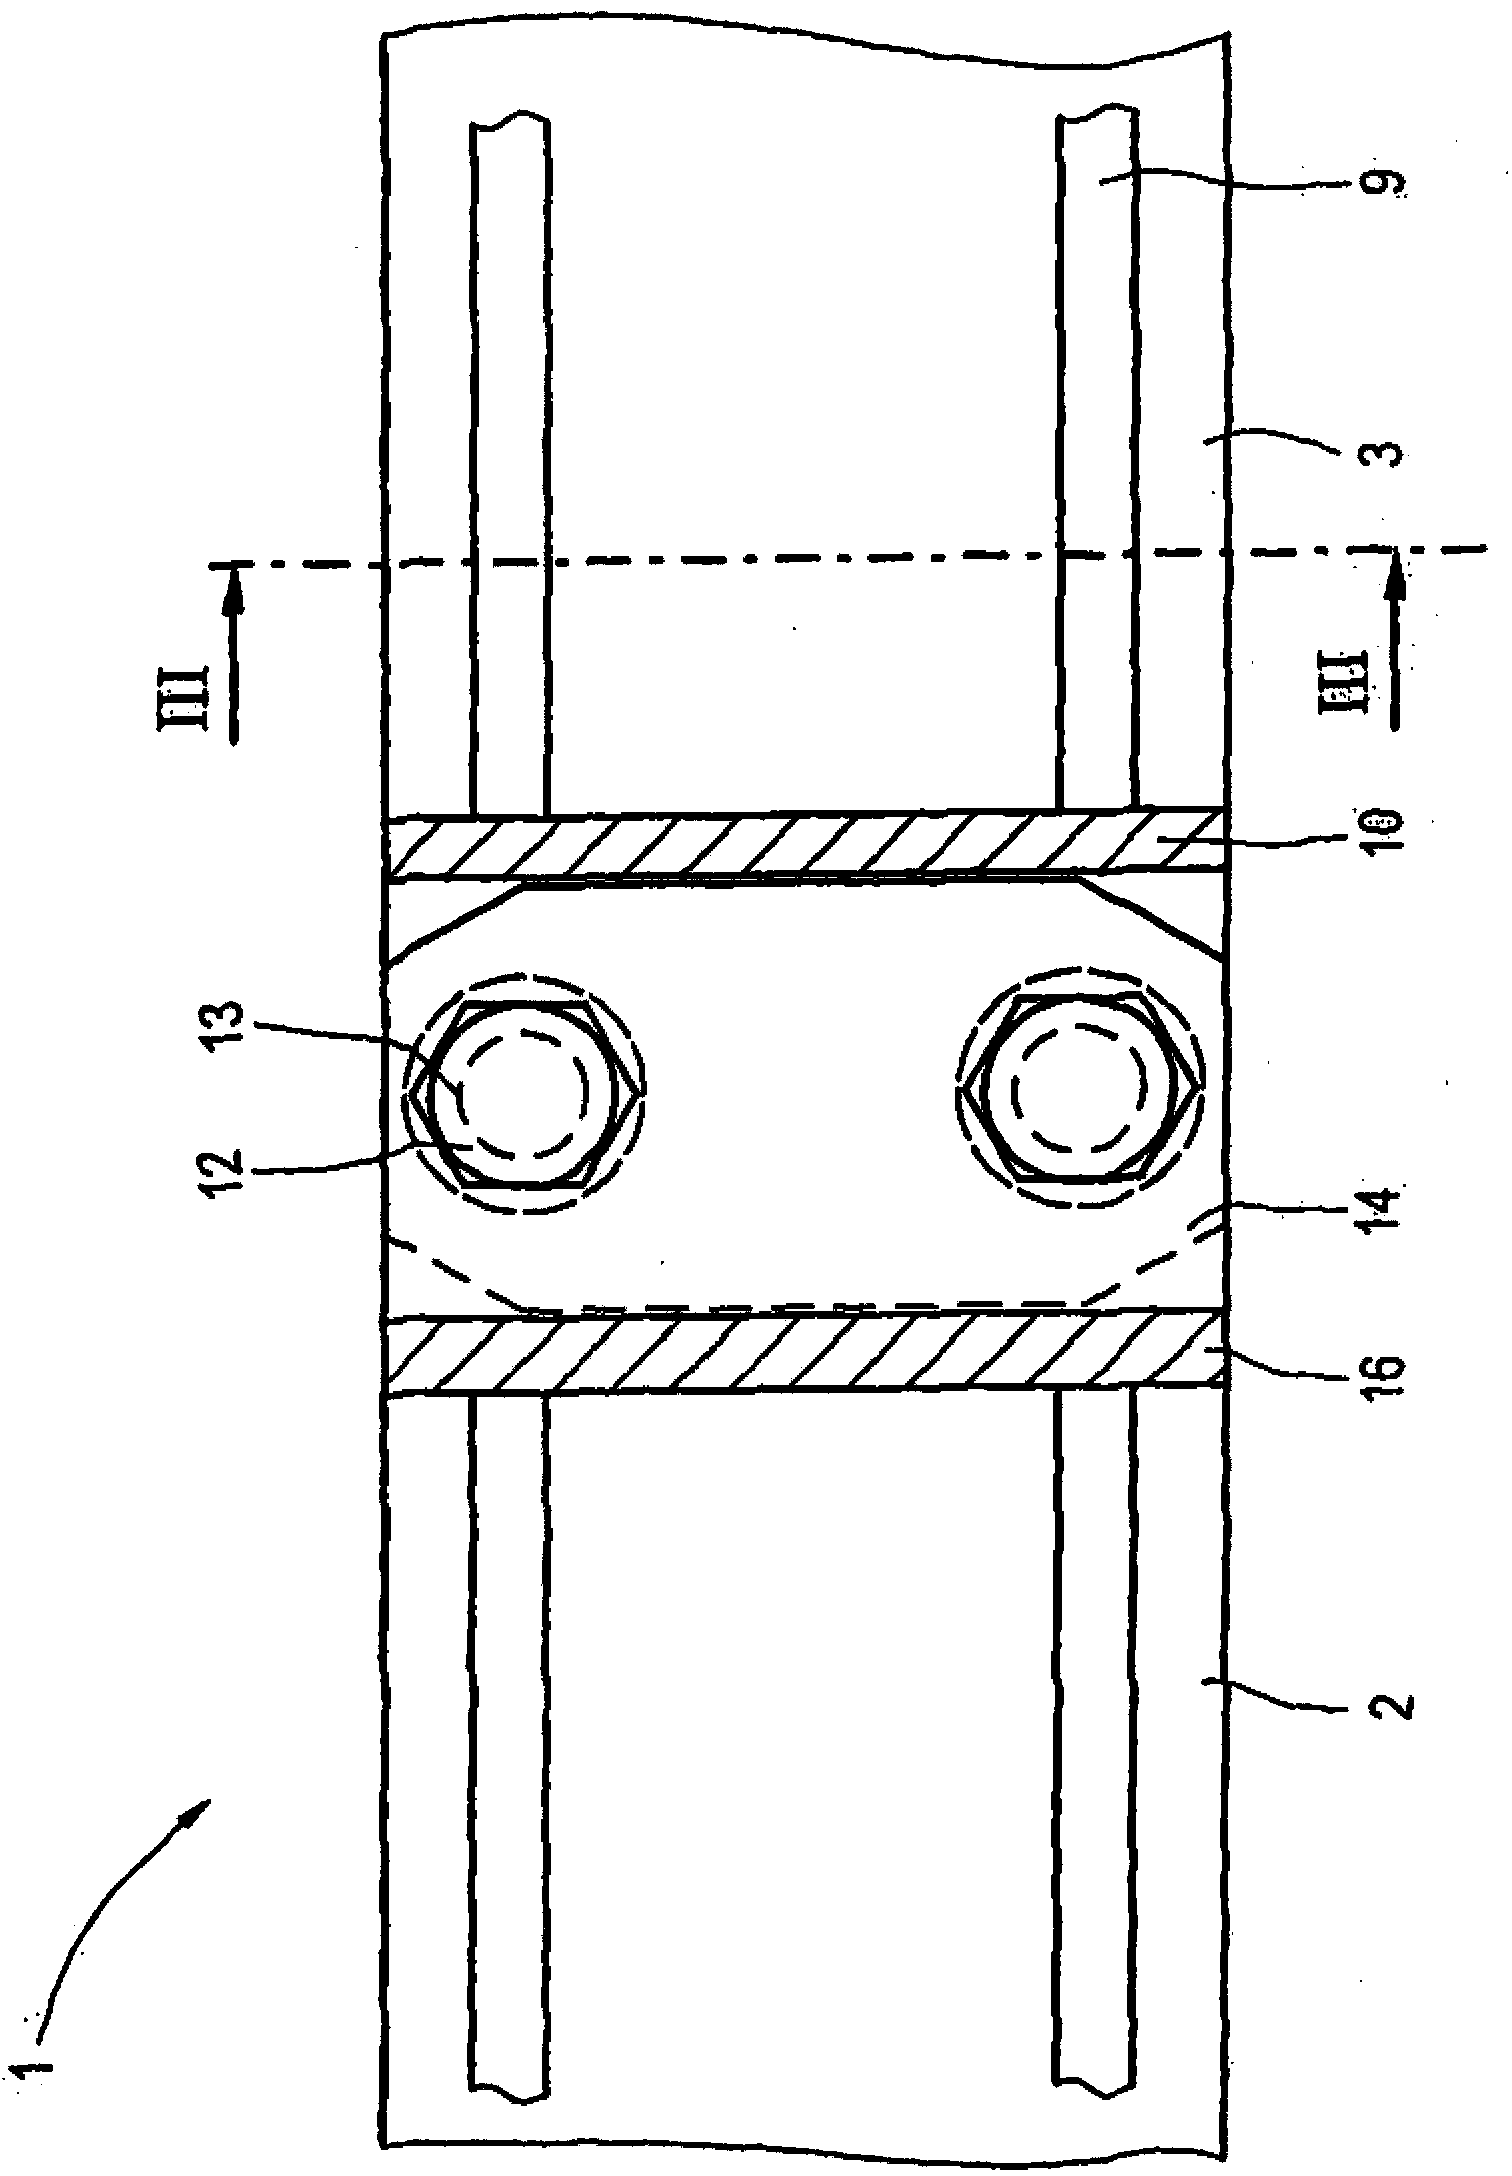 Prestressed concrete sleepers and method for transporting and installing a switch with prestressed concrete sleepers